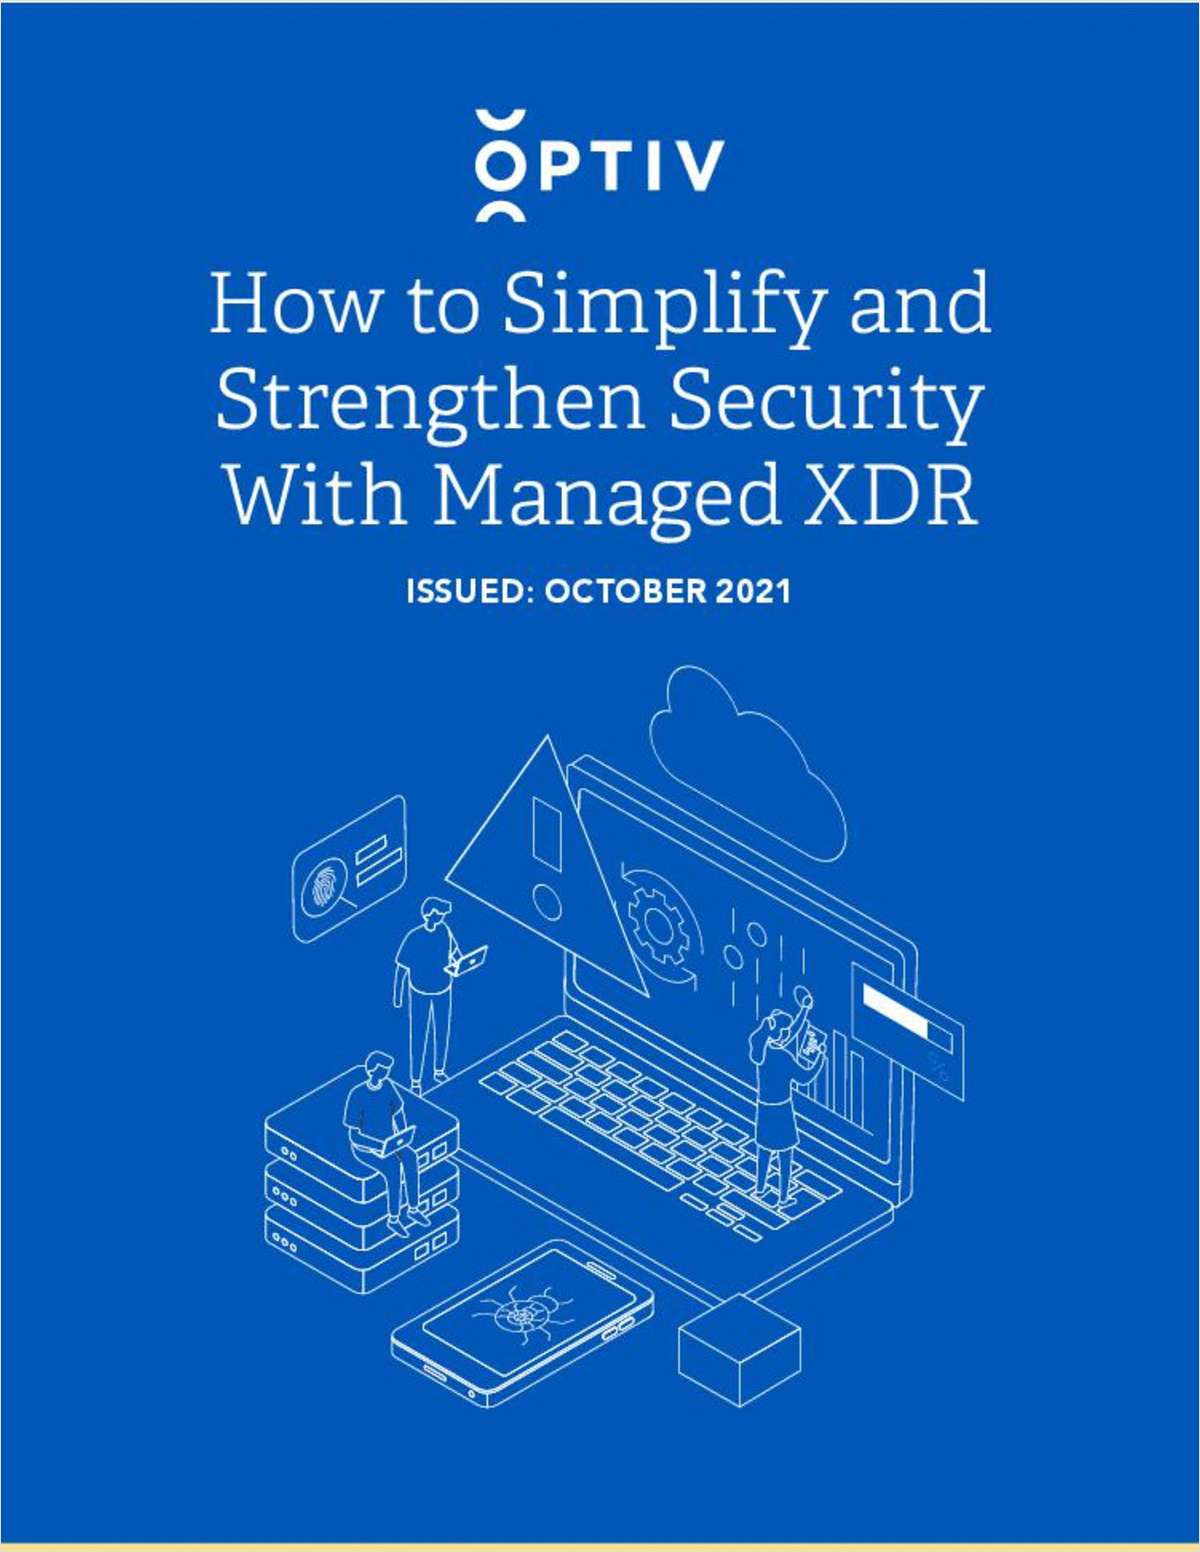 Field Guide #8: How to Simplify and Strengthen Security with Managed XDR